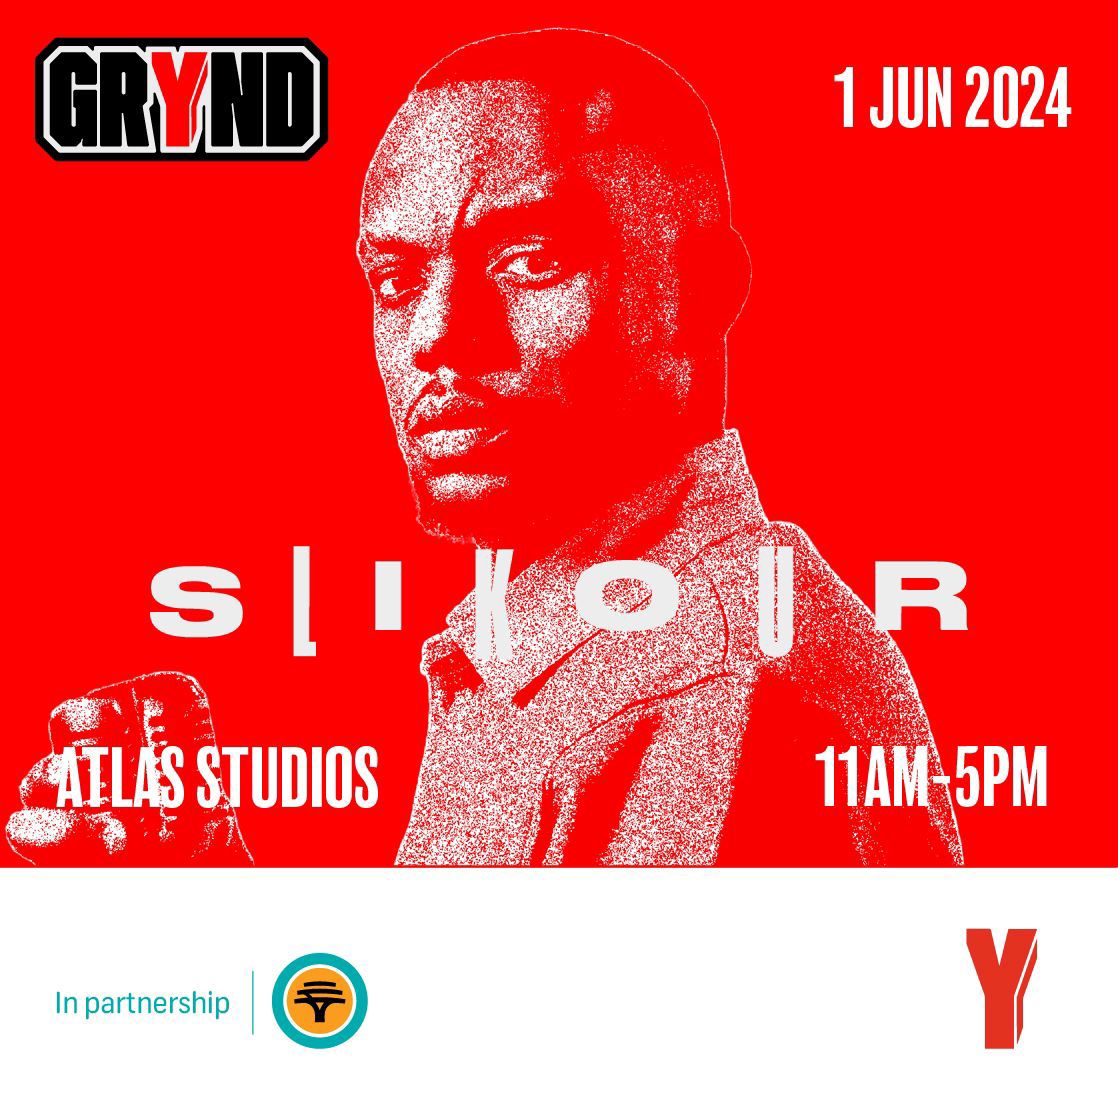 From humble beginnings to gaining mainstream recognition and being the head honcho of digital media, Slikour joins the lineup at #GRYND.

We suggest you get your tickets and join us as we hear more about his journey!

Tickets available @webtickets
#GRYNDwithFNB
#LoveFNB